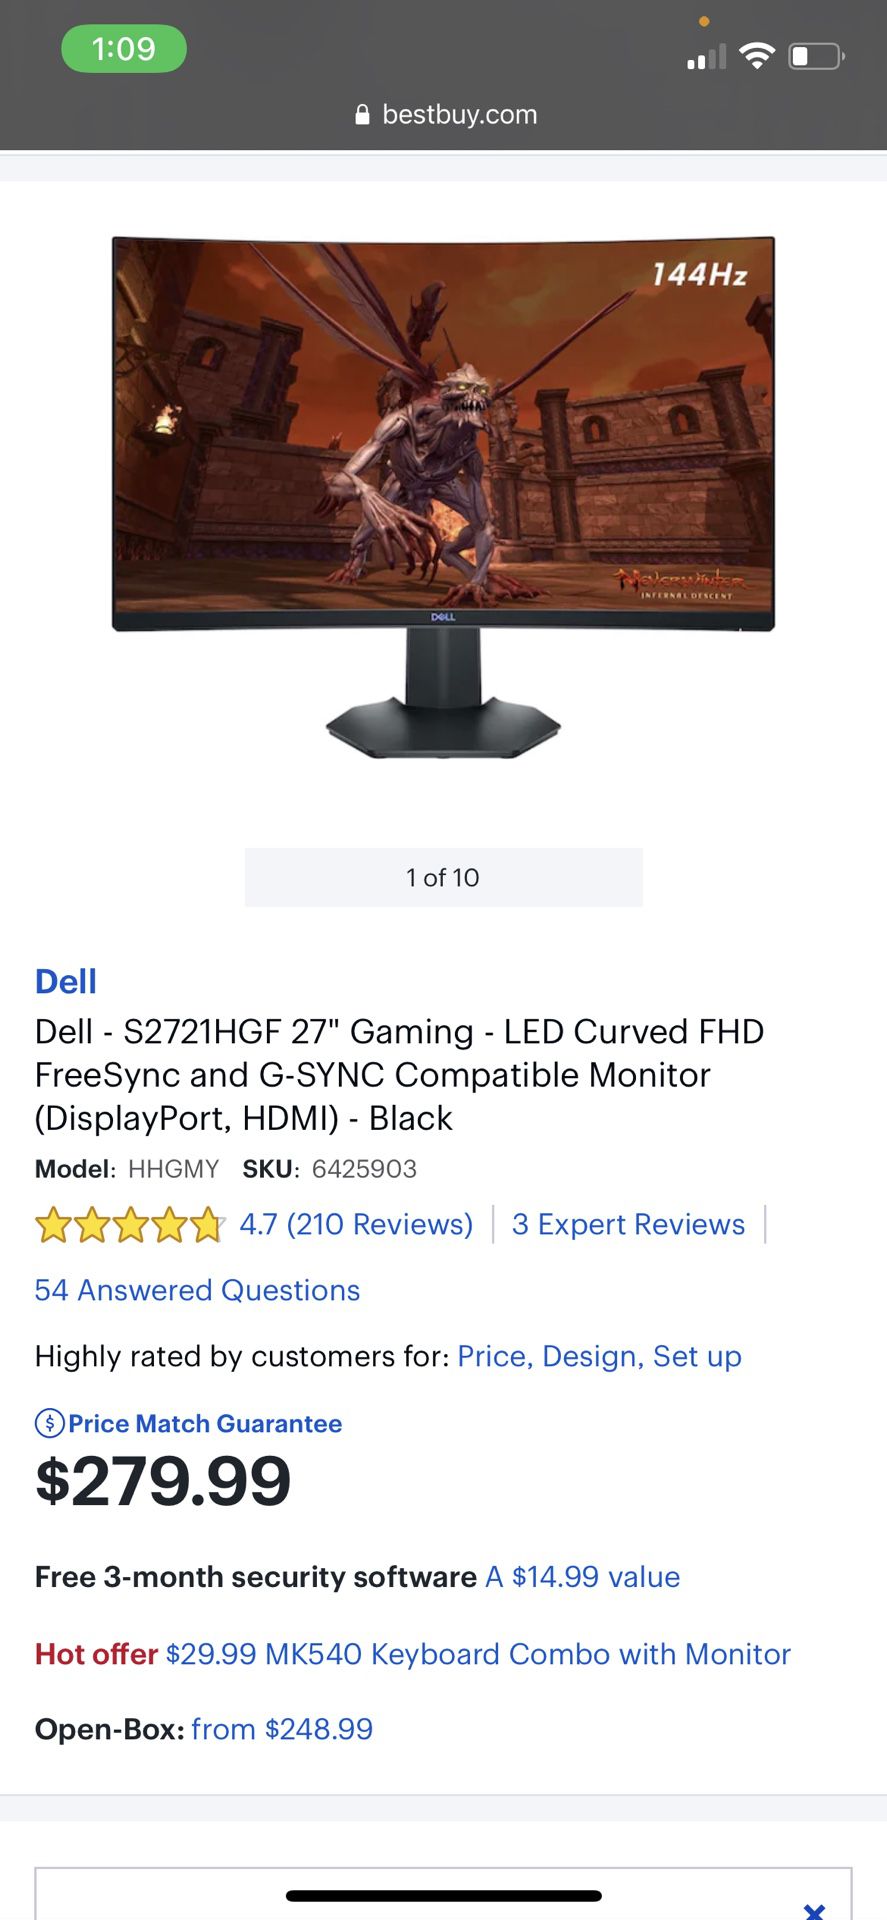 Dell 27” Gaming LED Curved 144 Hz